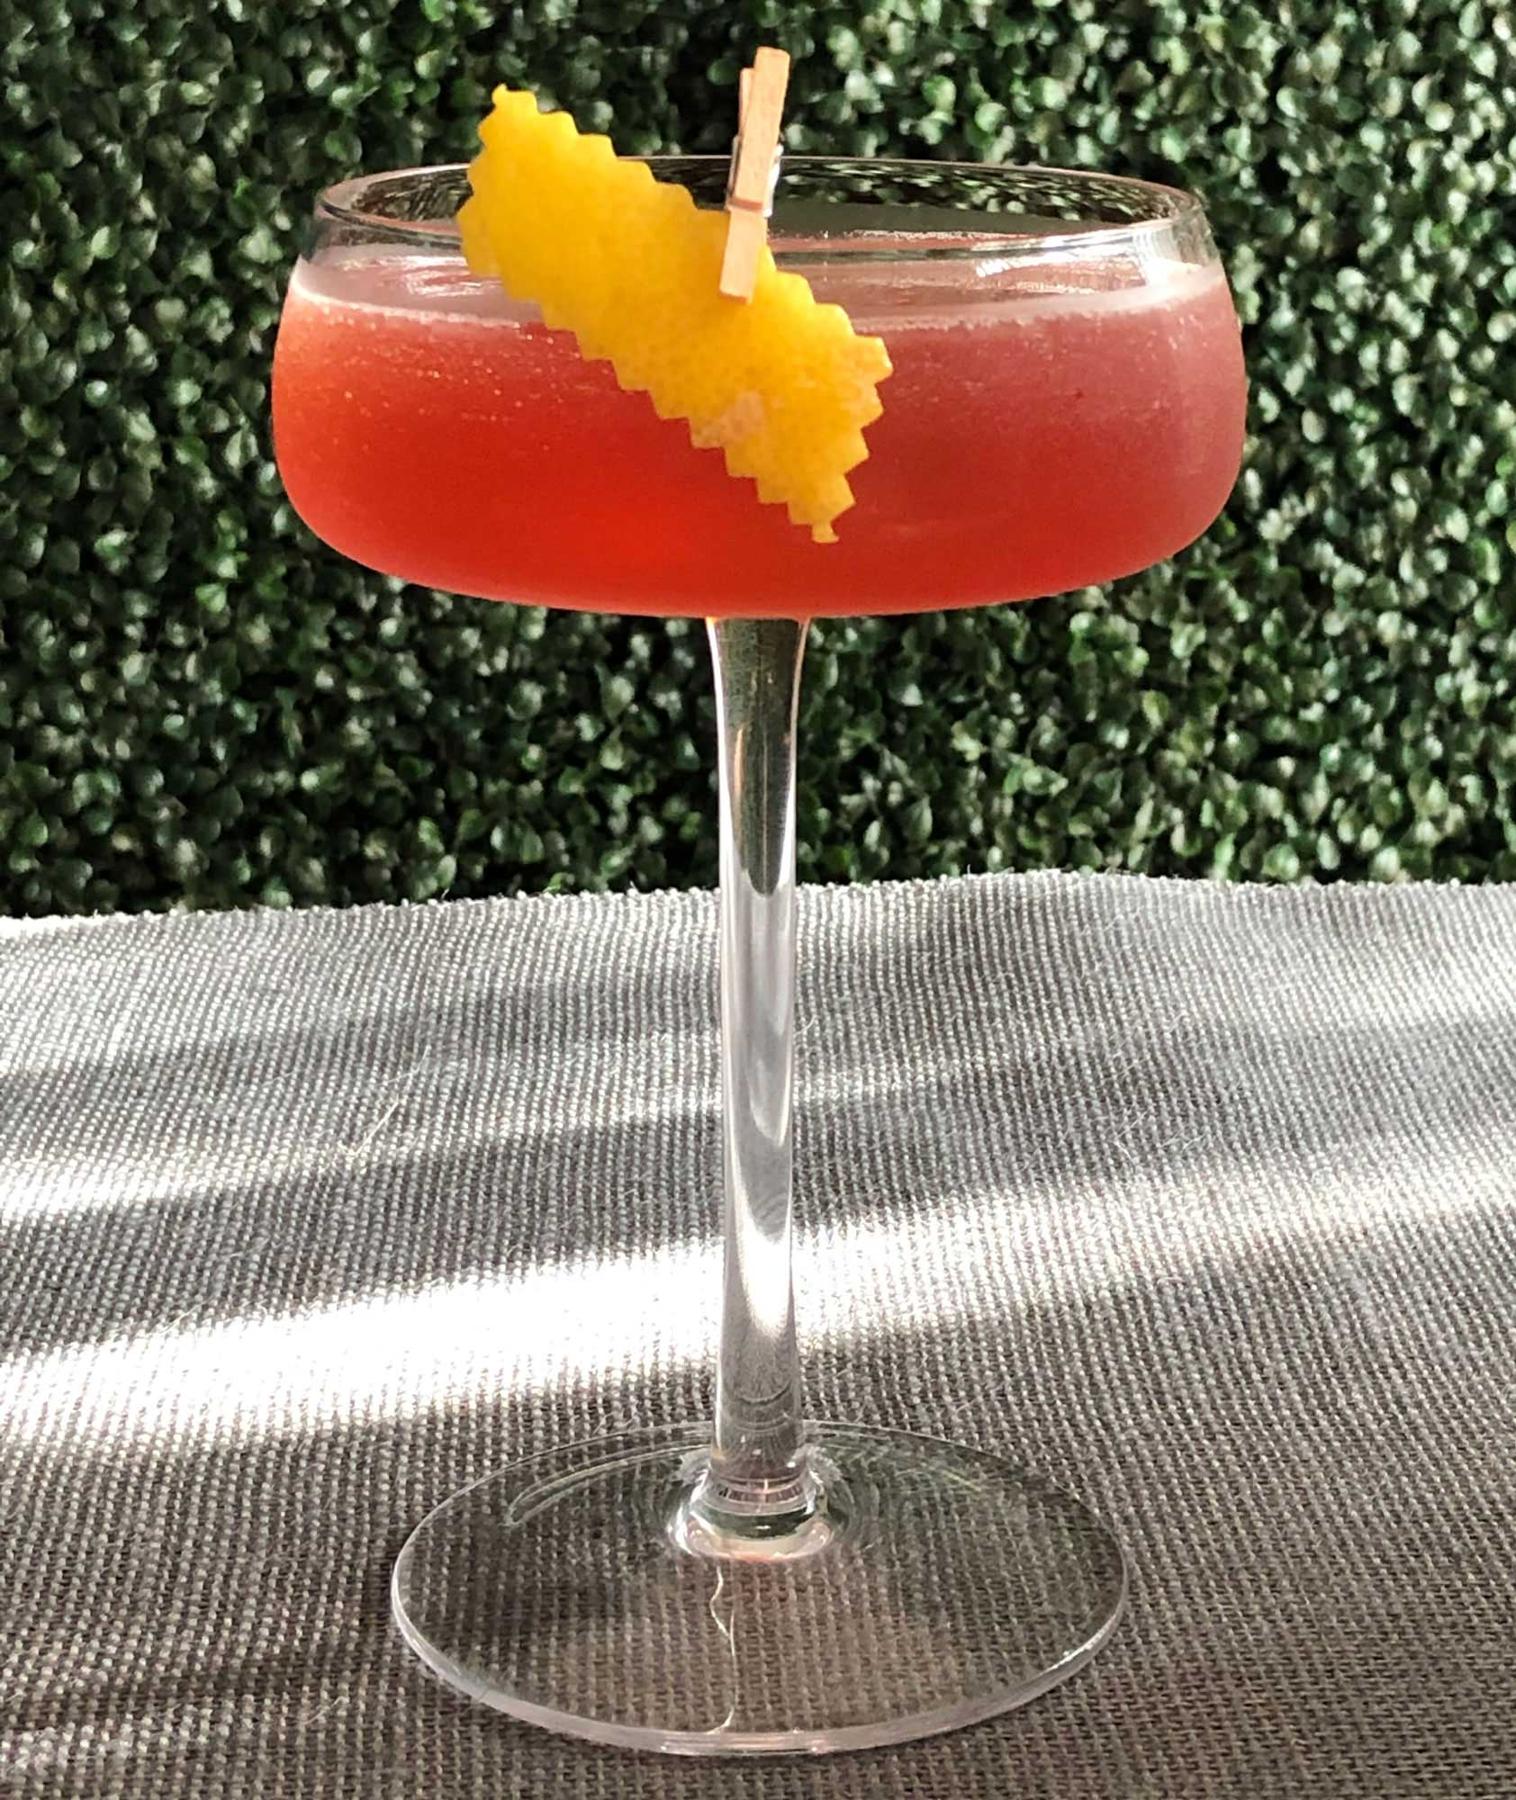 An example of the Spruce Goose, the mixed drink (drink), adapted from a drink by Alexander Mouzakitis, William Hallet, New York City, featuring Averell Damson Plum Gin Liqueur, Hayman’s London Dry Gin, maraschino liqueur, lemon juice, and grated lemon peel; photo by Lee Edwards